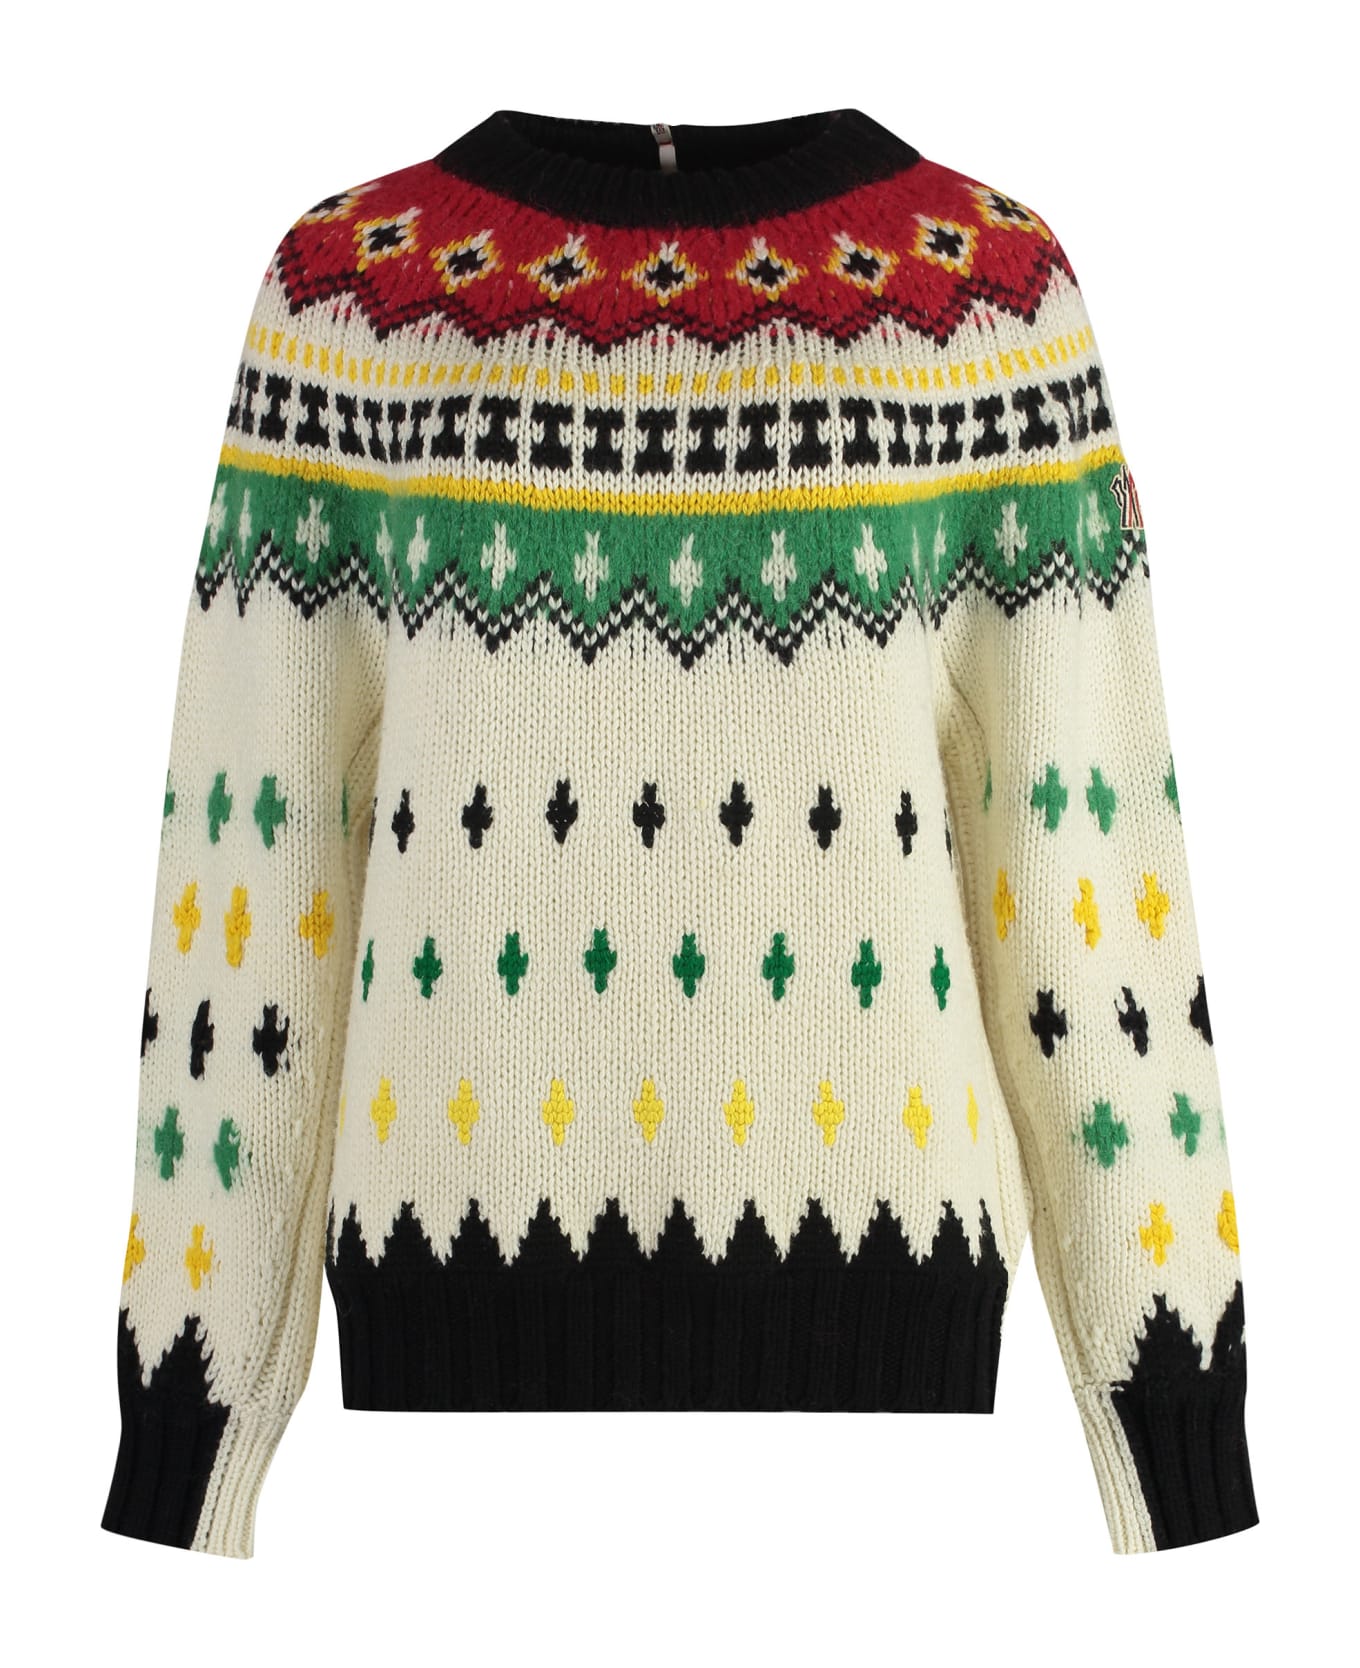 Moncler Grenoble Jacquard Wool Sweater - Multicolor